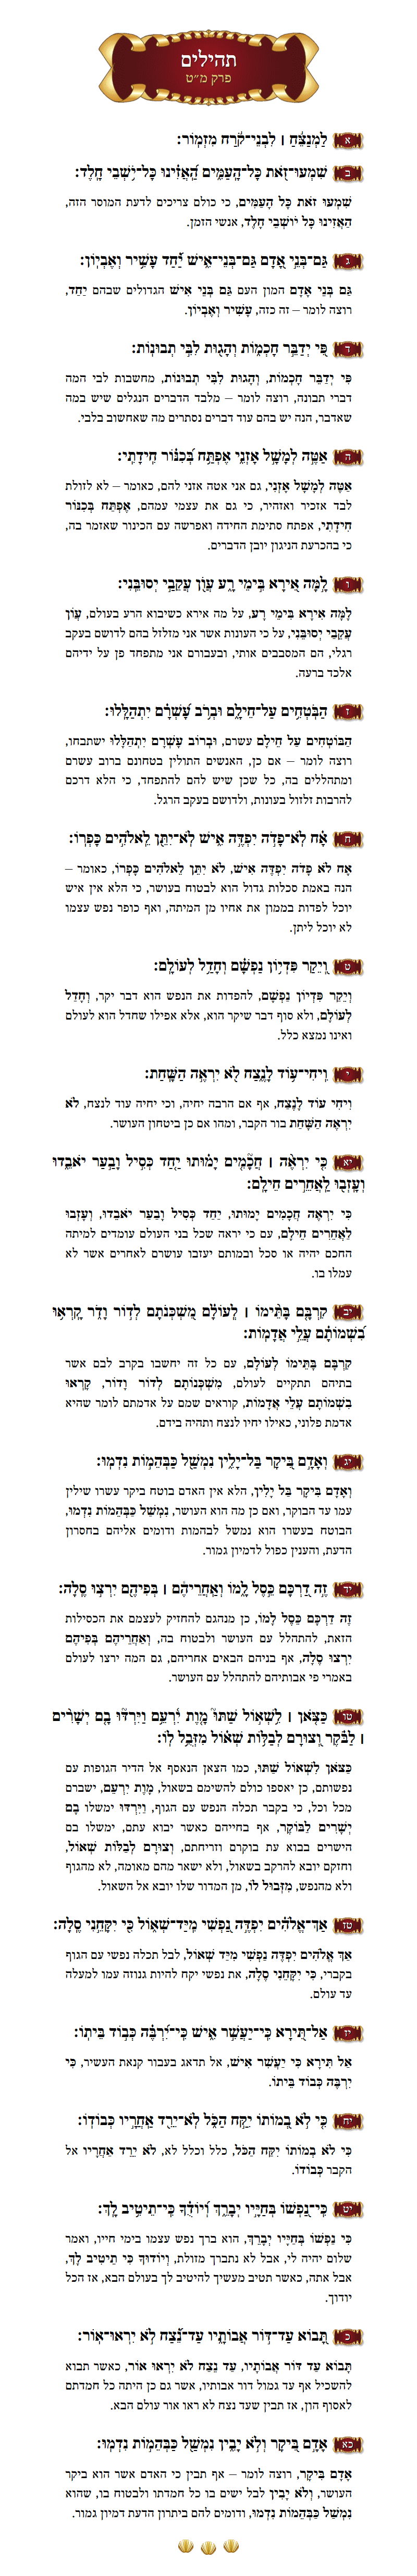 Sefer Tehillim Chapter 49 with commentary